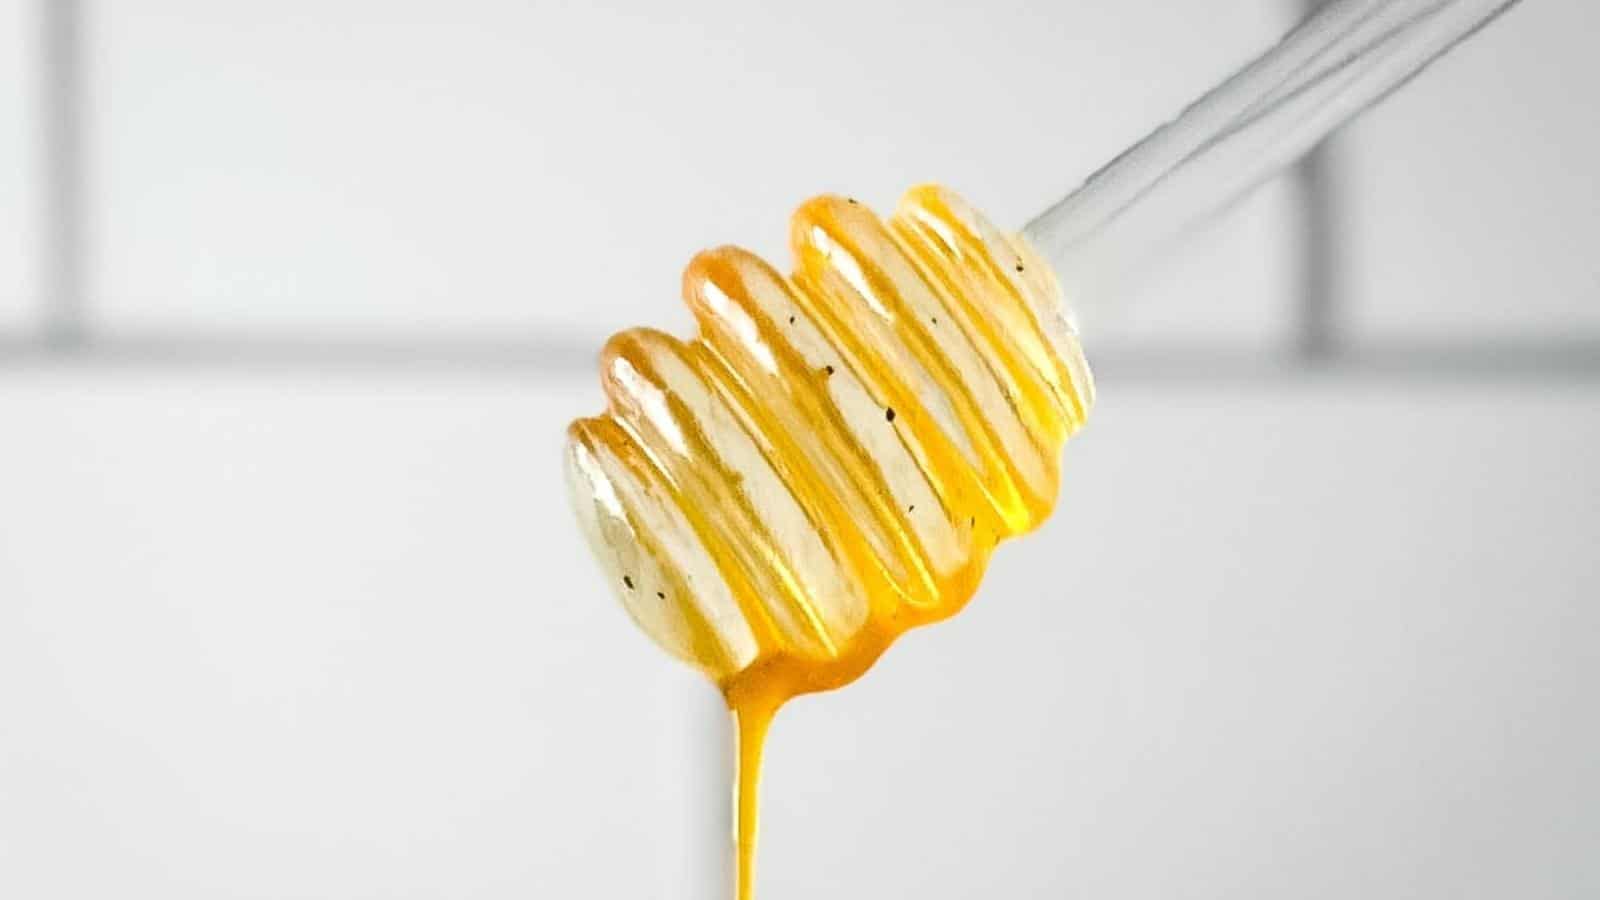 Closeup of honey dipper dripping hot honey sauce in front of a white subway tile wall.